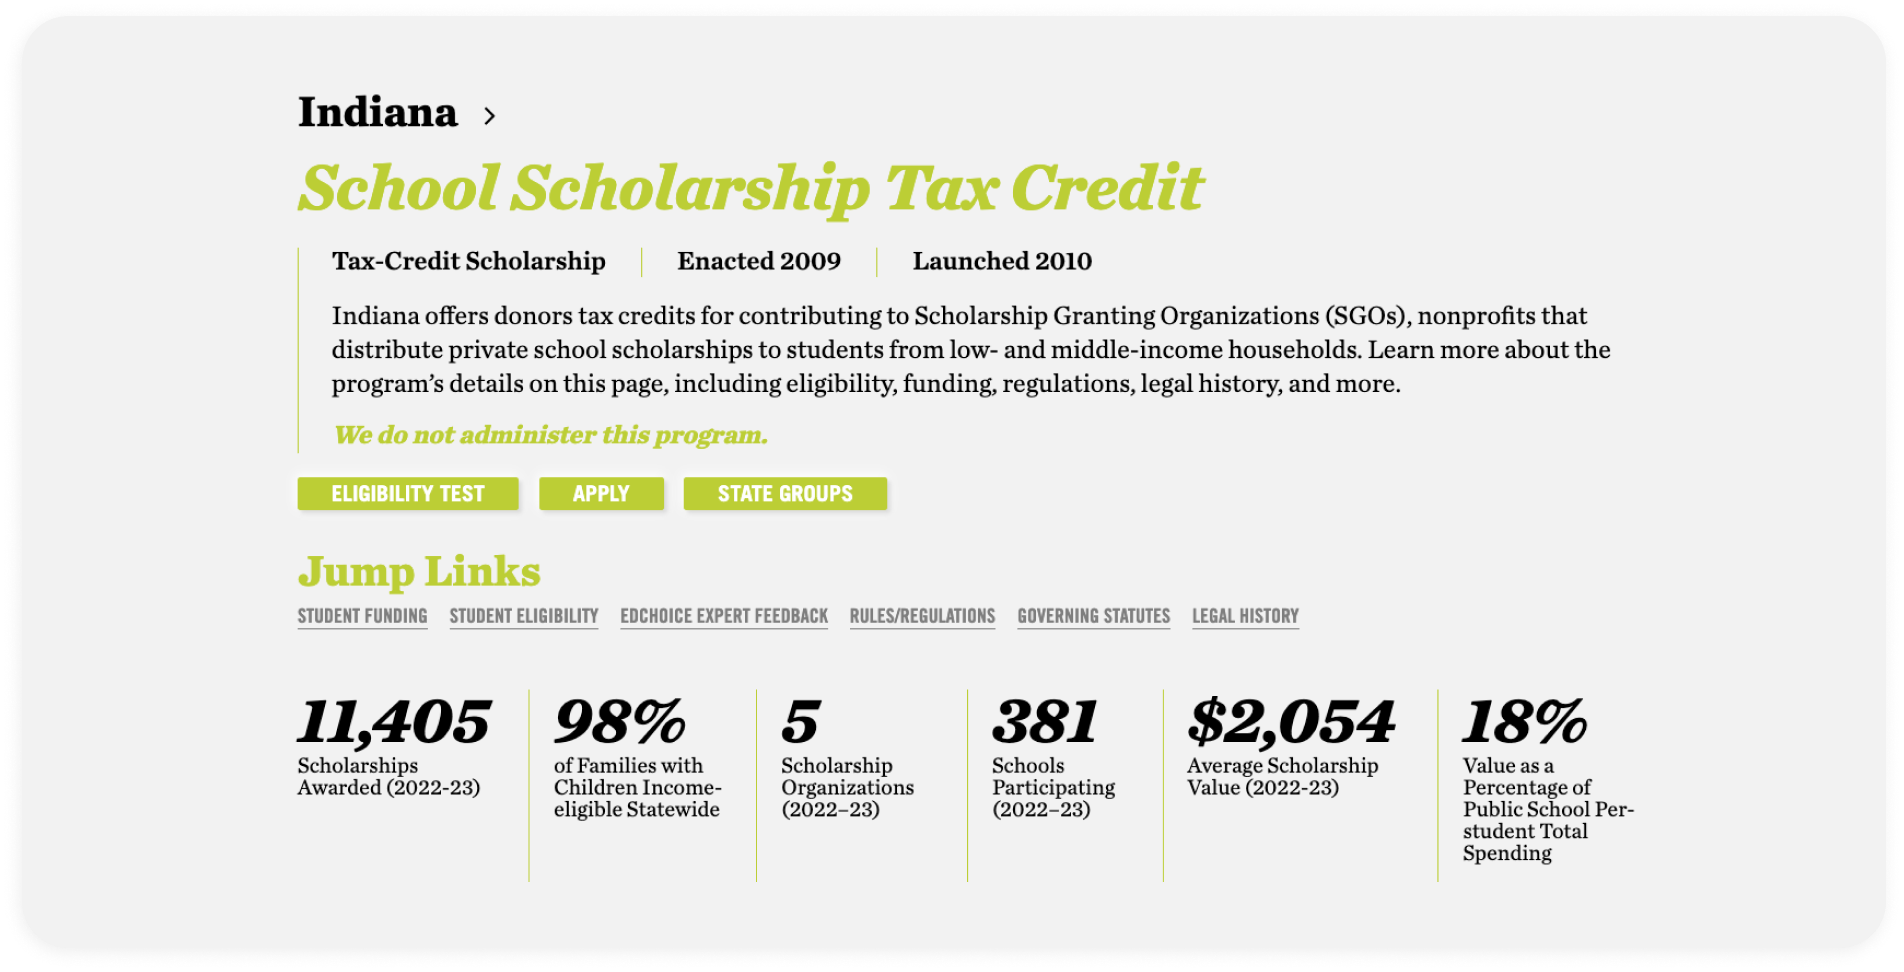 Screenshot of Indiana School Scholarship Tax Credit page from EdChoice